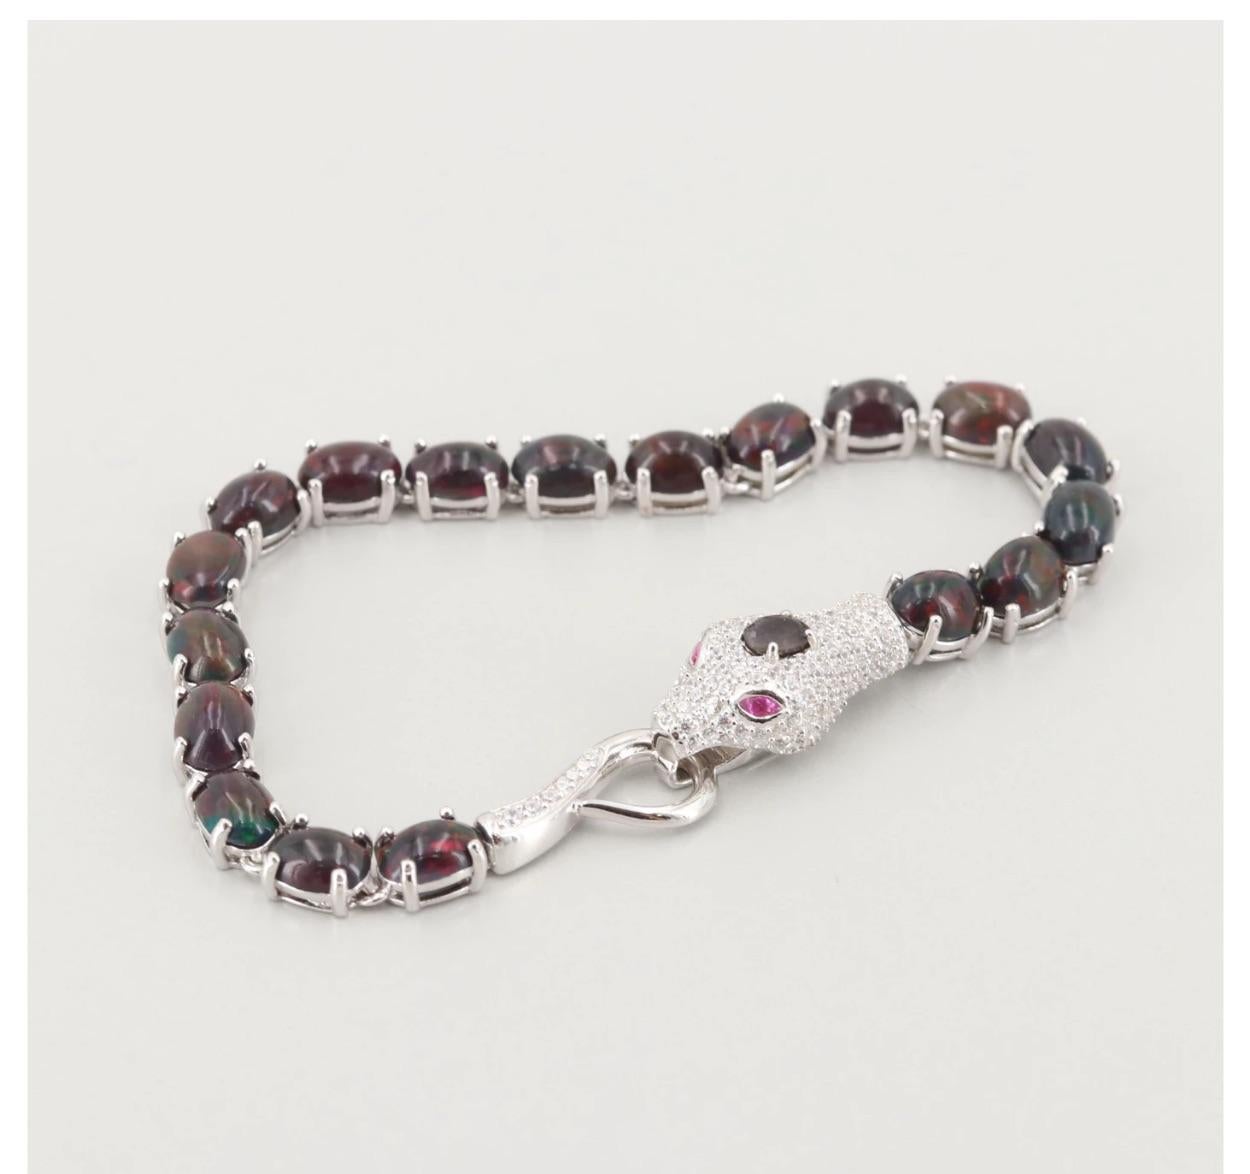 A beautiful exotic Sterling Silver Gemstone Bracelet with Red Cabochon Opals, an oval Sapphire on the Snake Pave Diamond Head, with Red Stone Eyes.
15 CTW Red opal gem bracelet, diamond pave head with an oval .24 carat Sapphire center and two